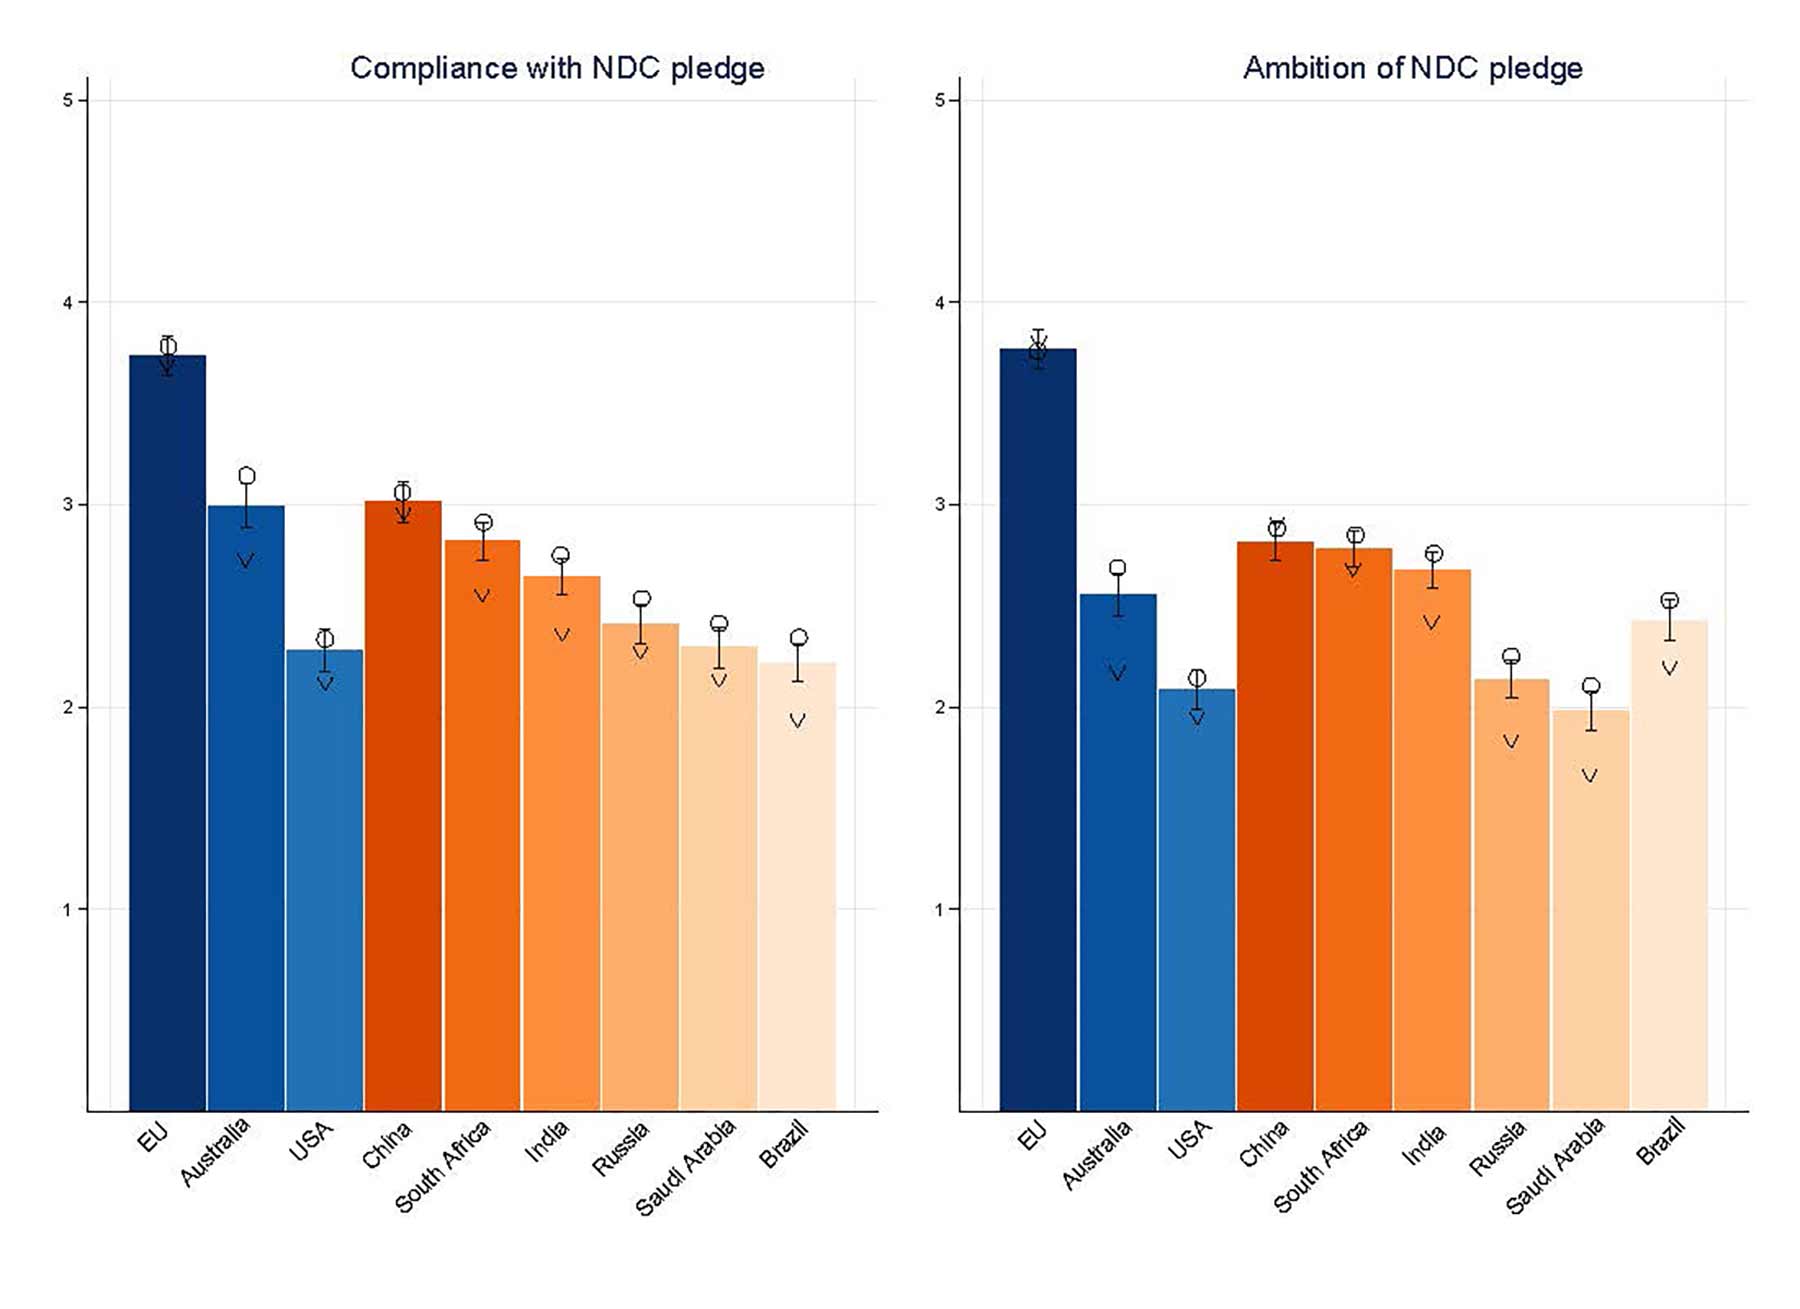 Graphs showing countries' compliance and ambition with NDC pledge.